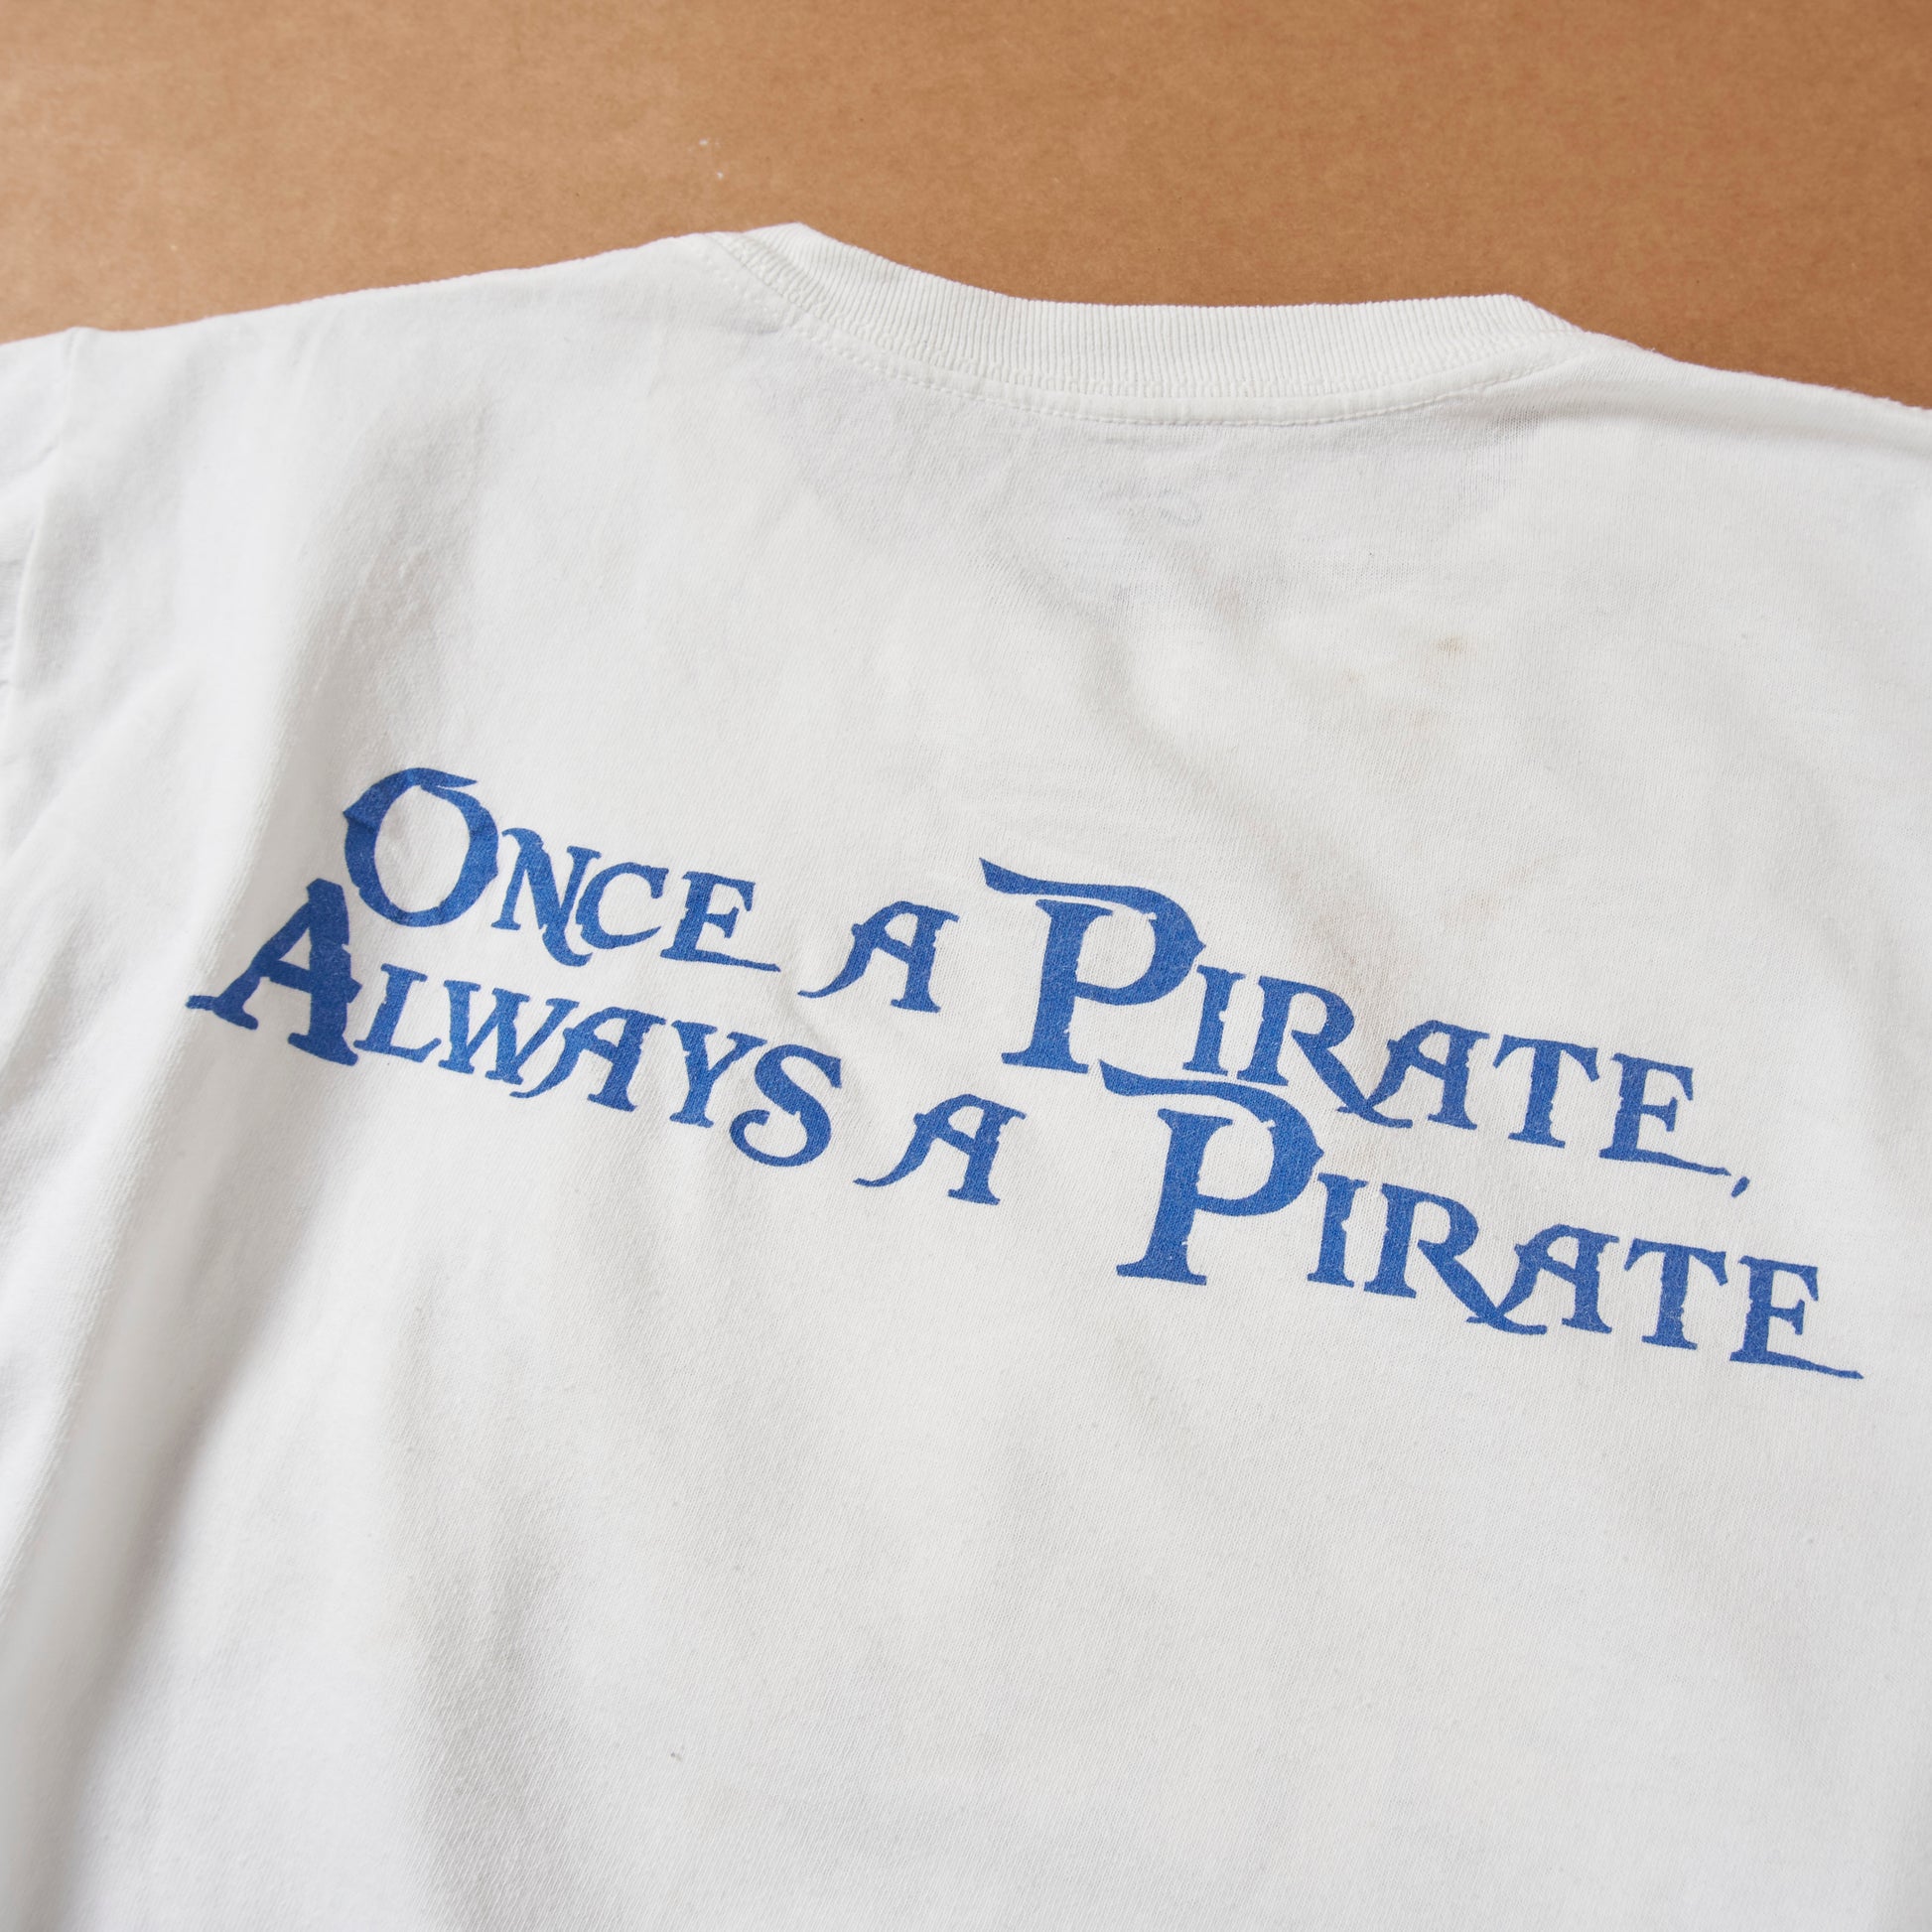 Once a Pirate always a Pirate?